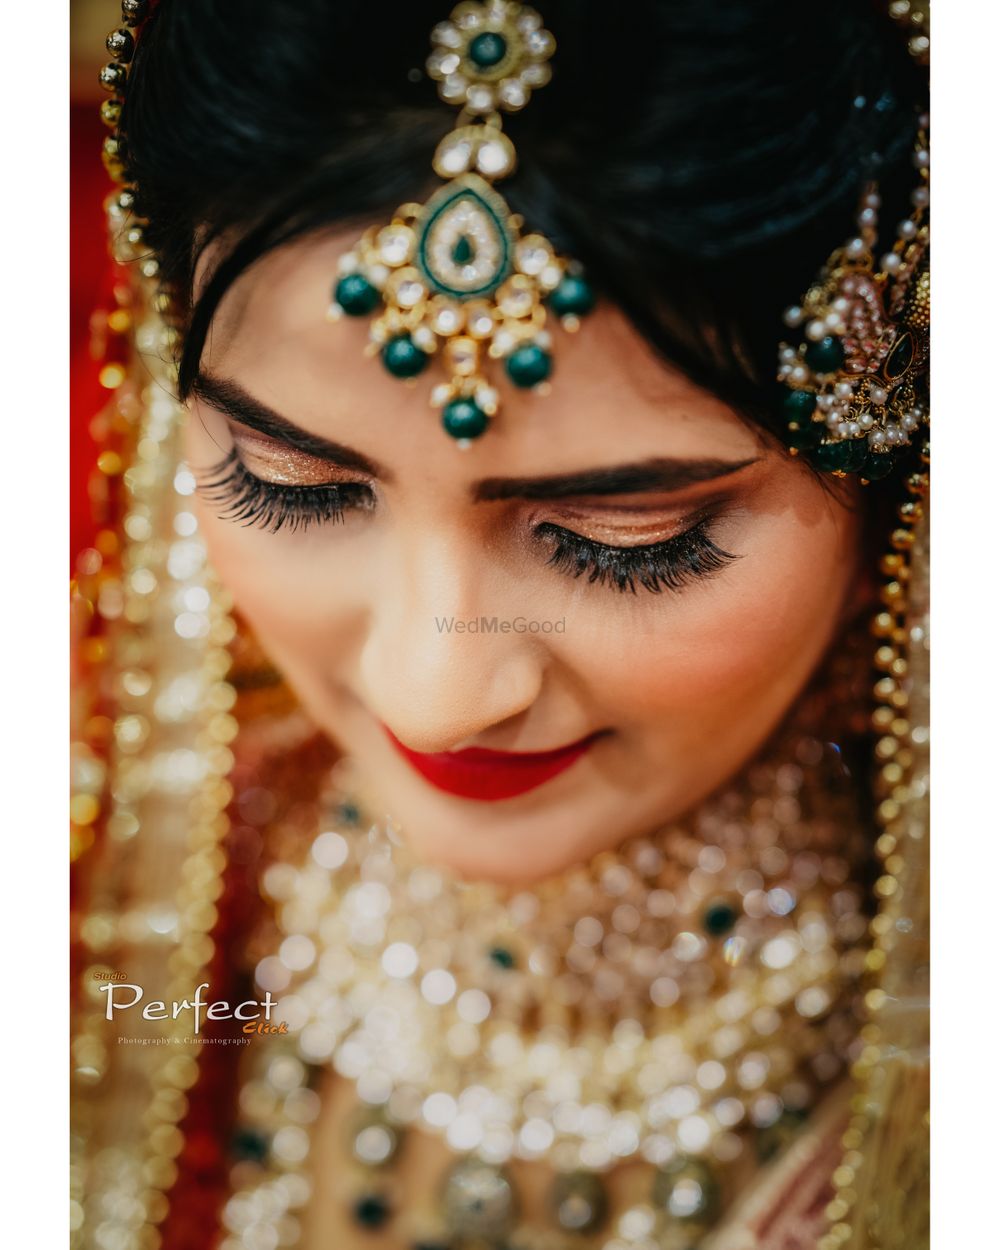 Photo From SABA WEDS SHADAB - By Studio Perfect Click